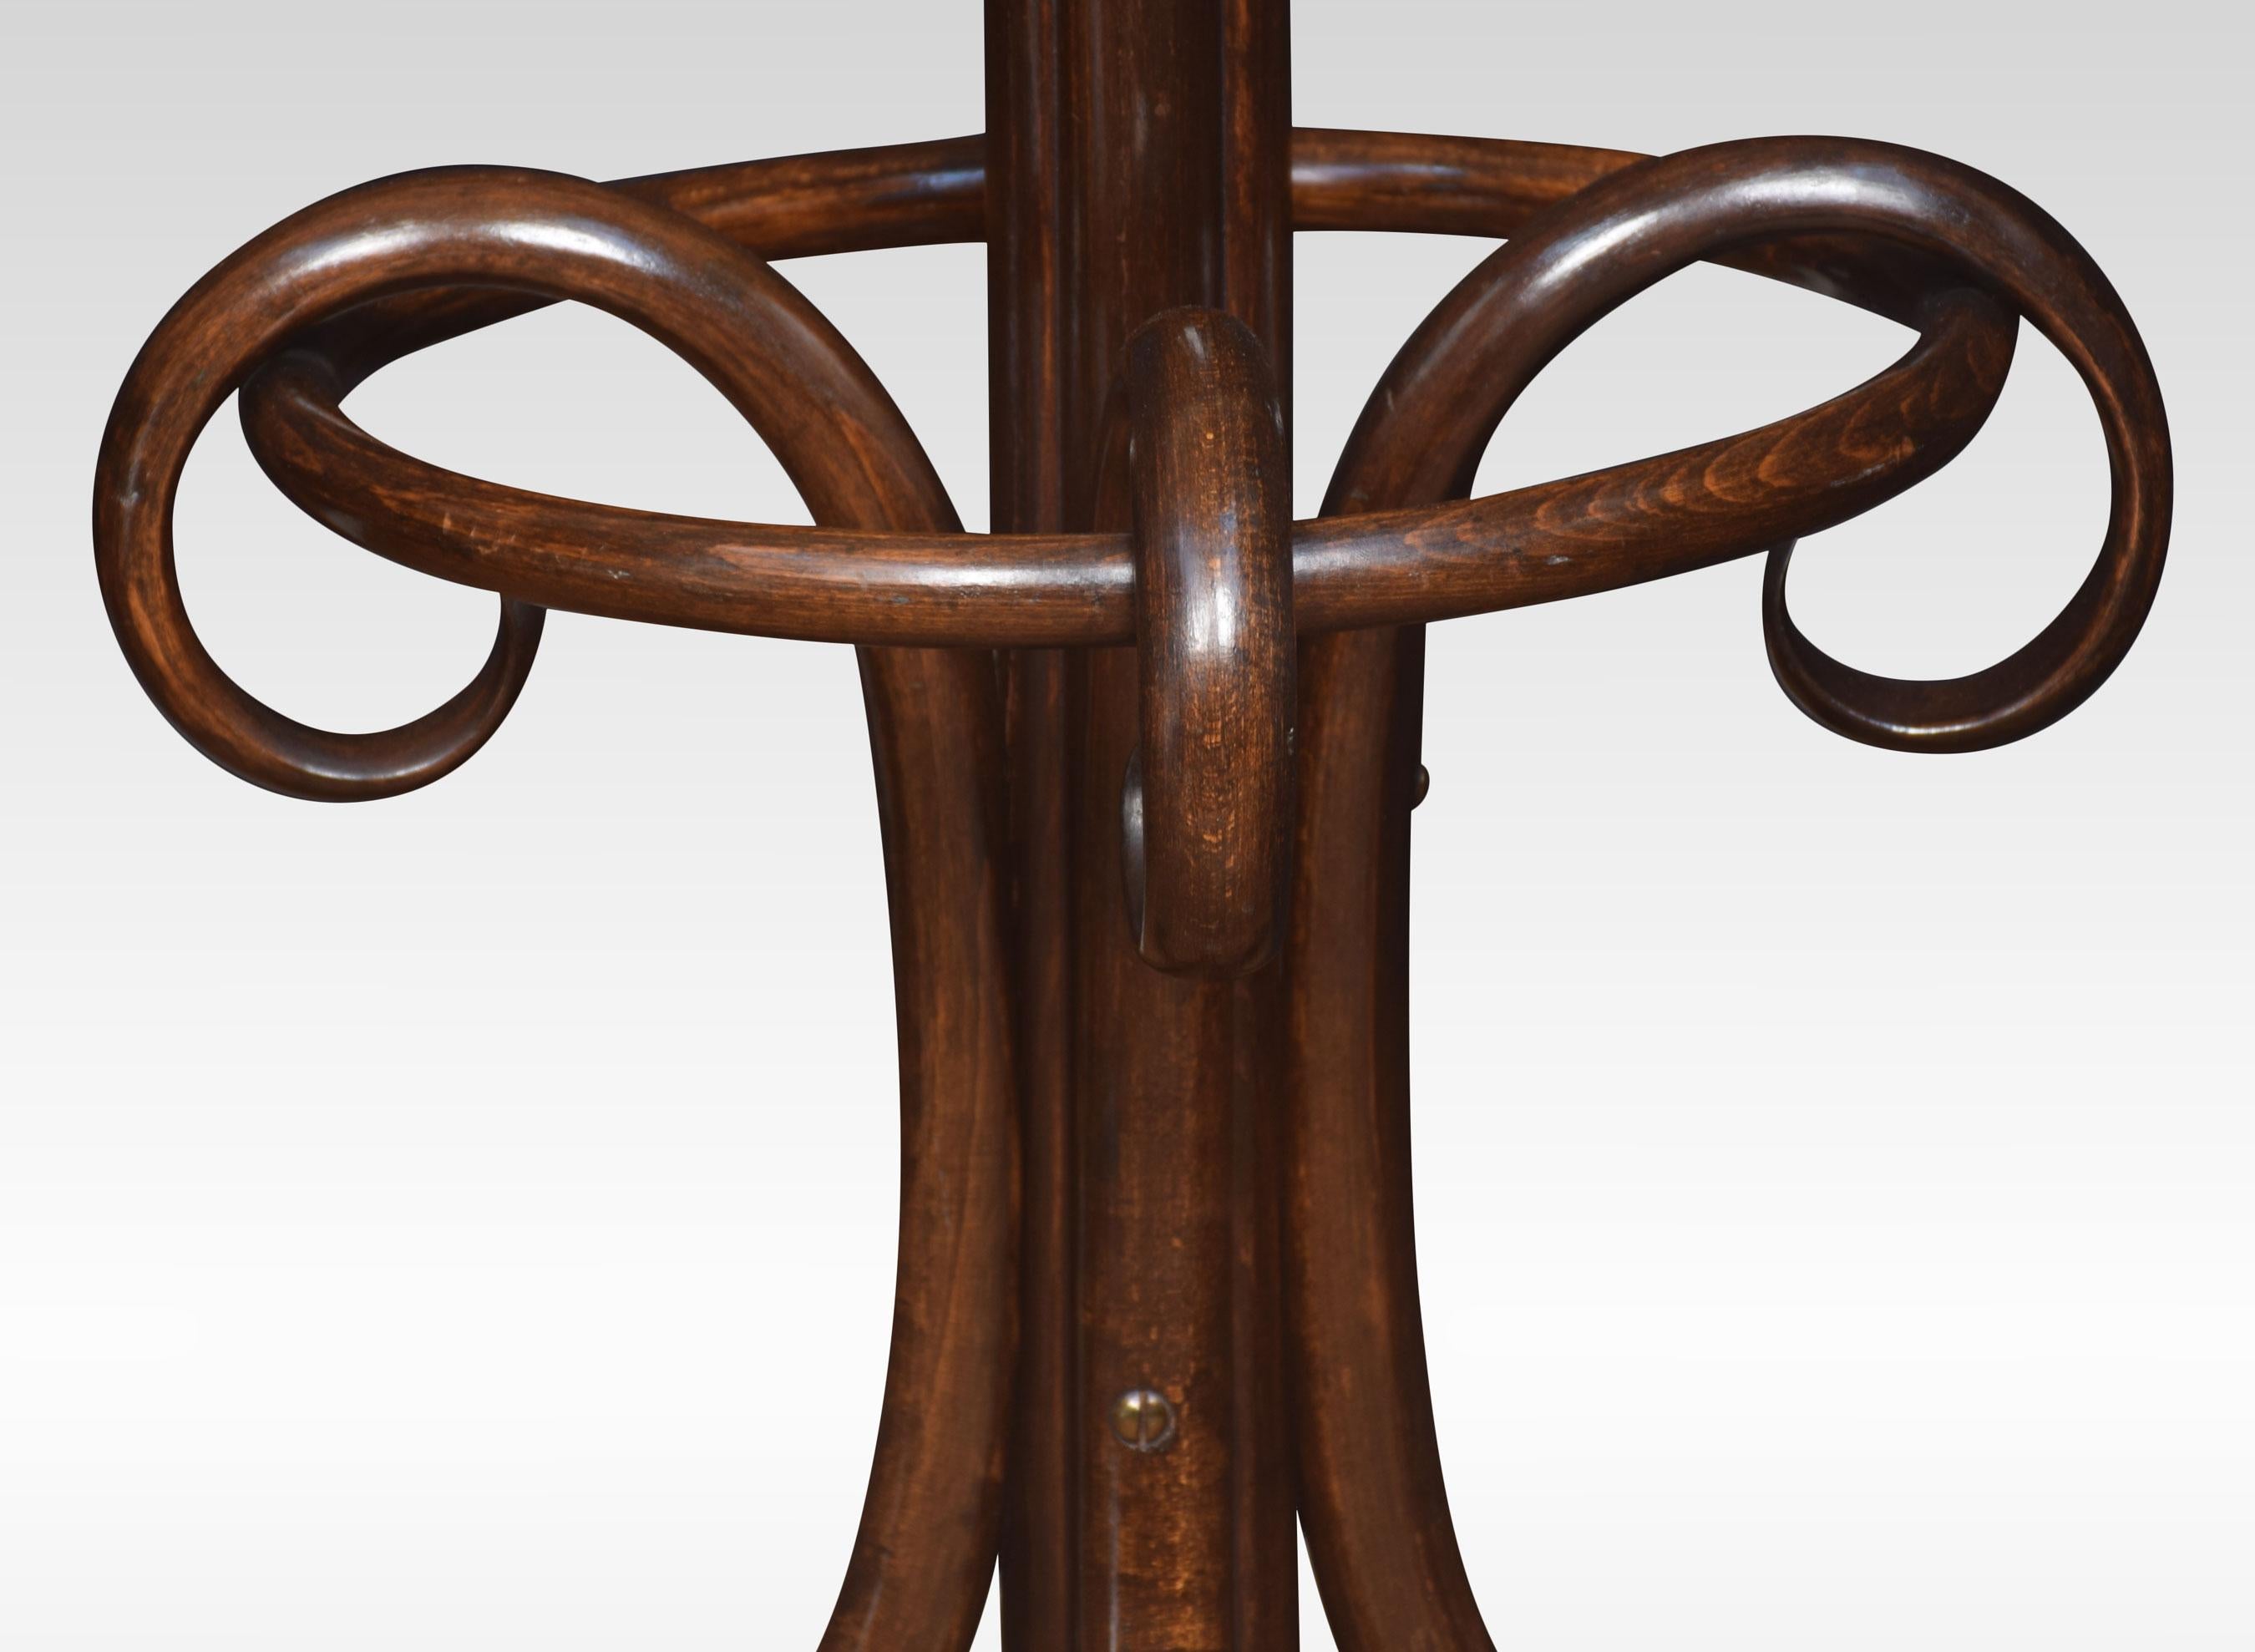 Late 19th-century bentwood hall or hat stand. The top section having shaped supports above the large central column to the base having four similar shaped supports
Dimensions
Height 80 inches
Width 28 inches
Depth 28 inches.